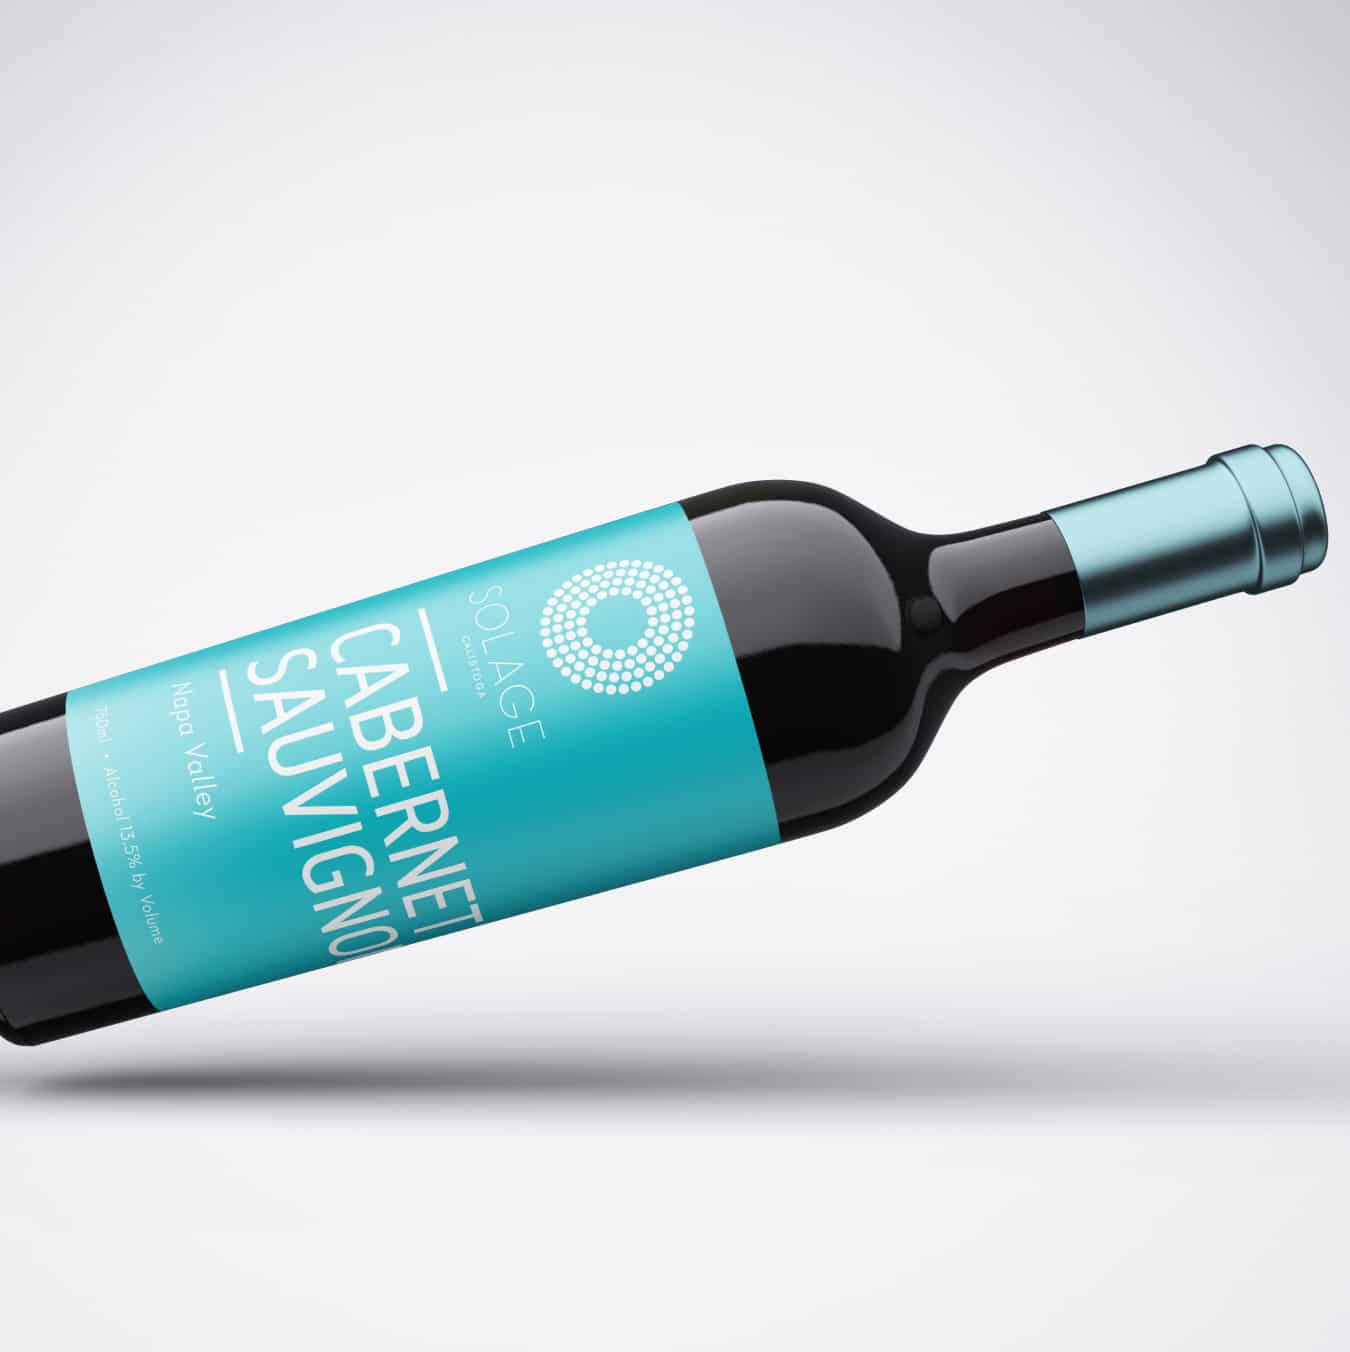 Photo of an Solage branded wine bottle